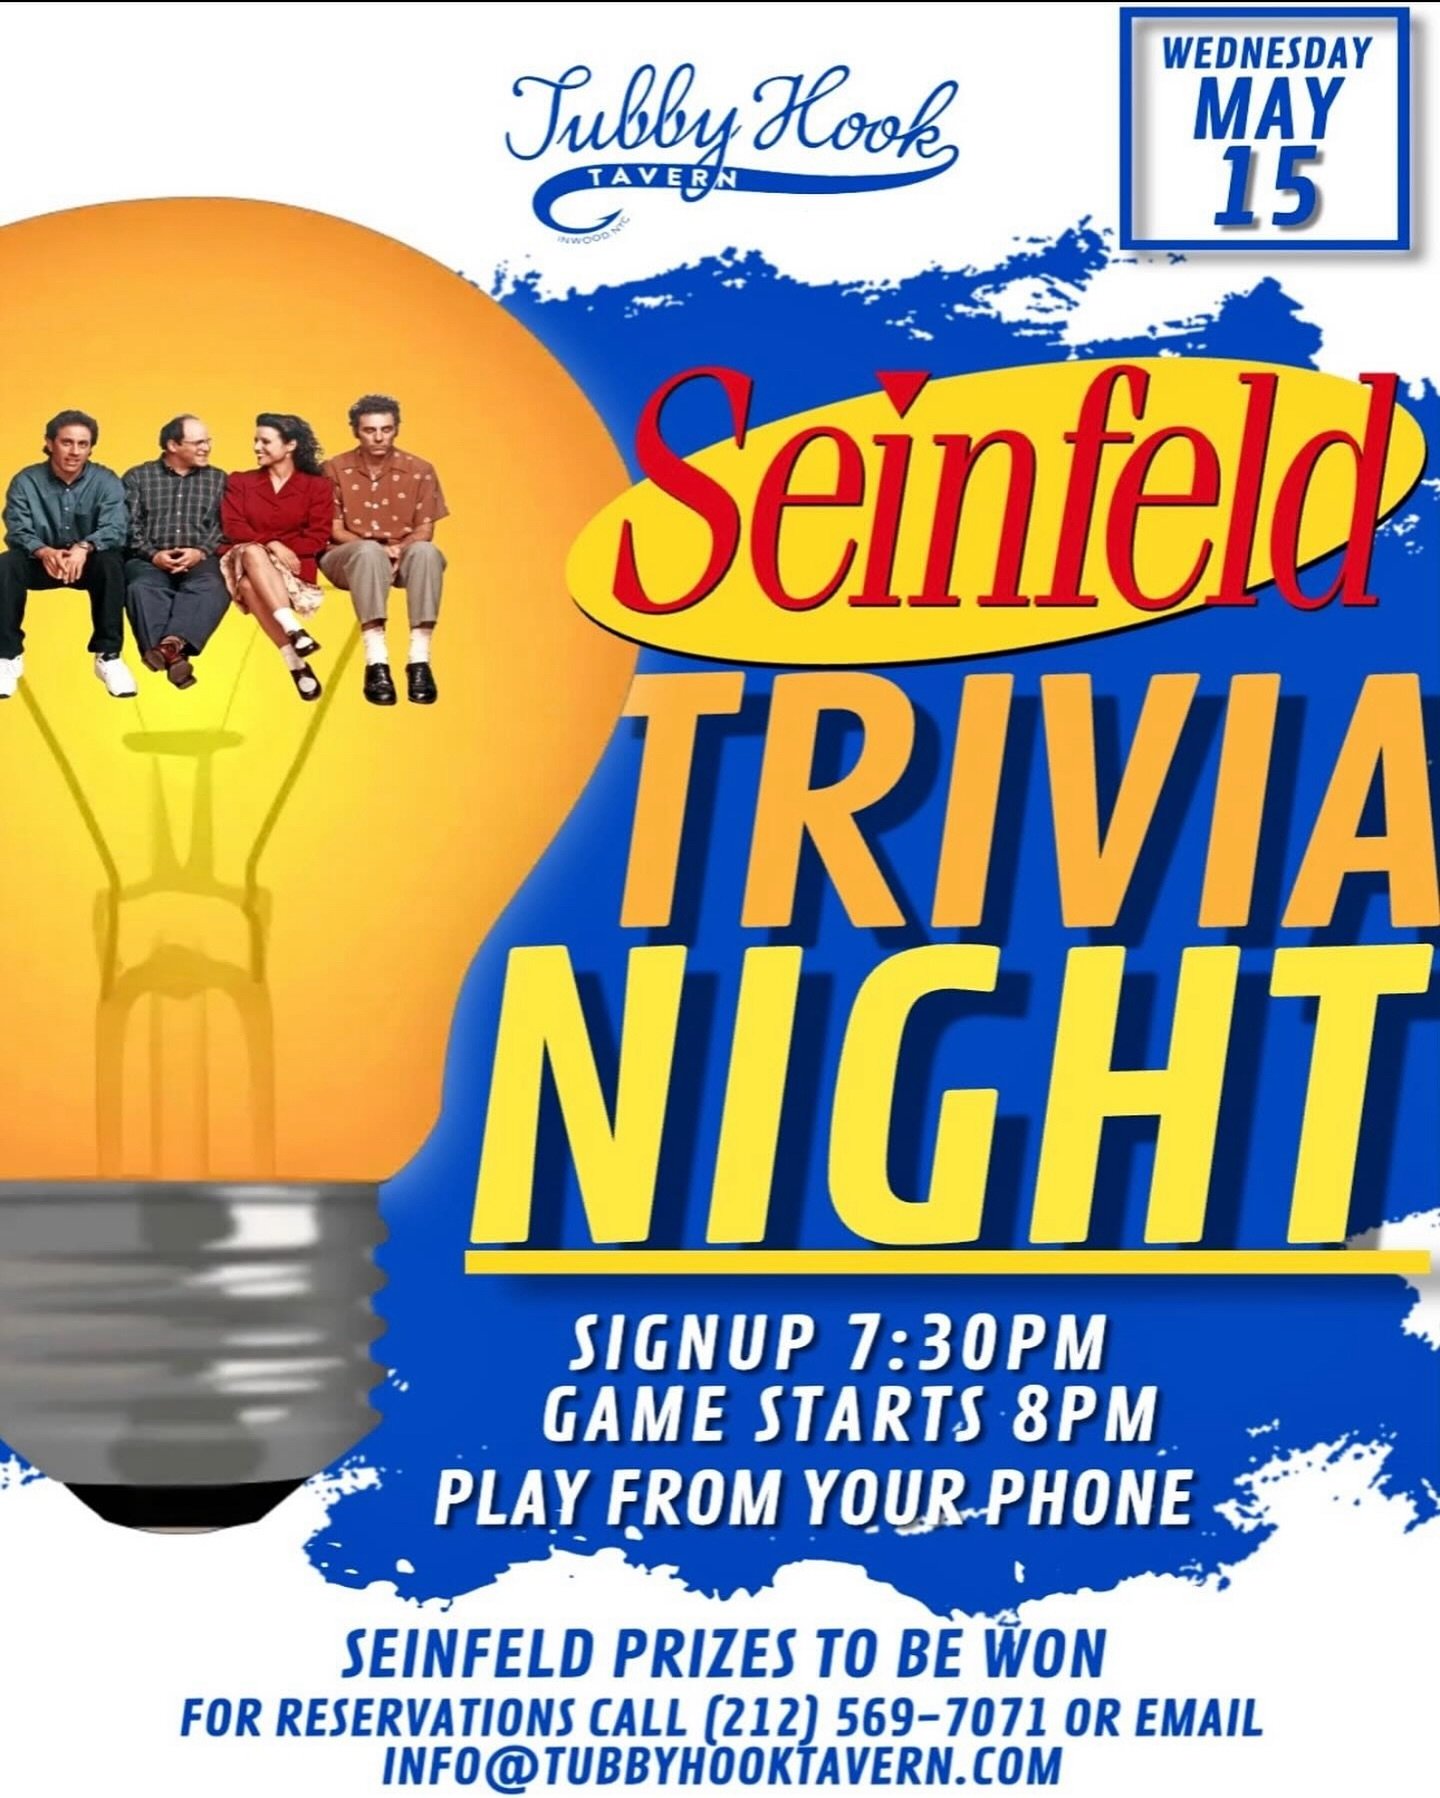 🚨 Registration begins at 7:30pm tonight 🚨

For reservations call (212) 569-7071 or email us at 
Info@tubbyhooktavern.com

4946 Broadway @207th St. New York, 10034

#inwood #inwoodnyc #trivia #trivianight #seinfeld #seinfeldtrivia #quiz #quiznight #